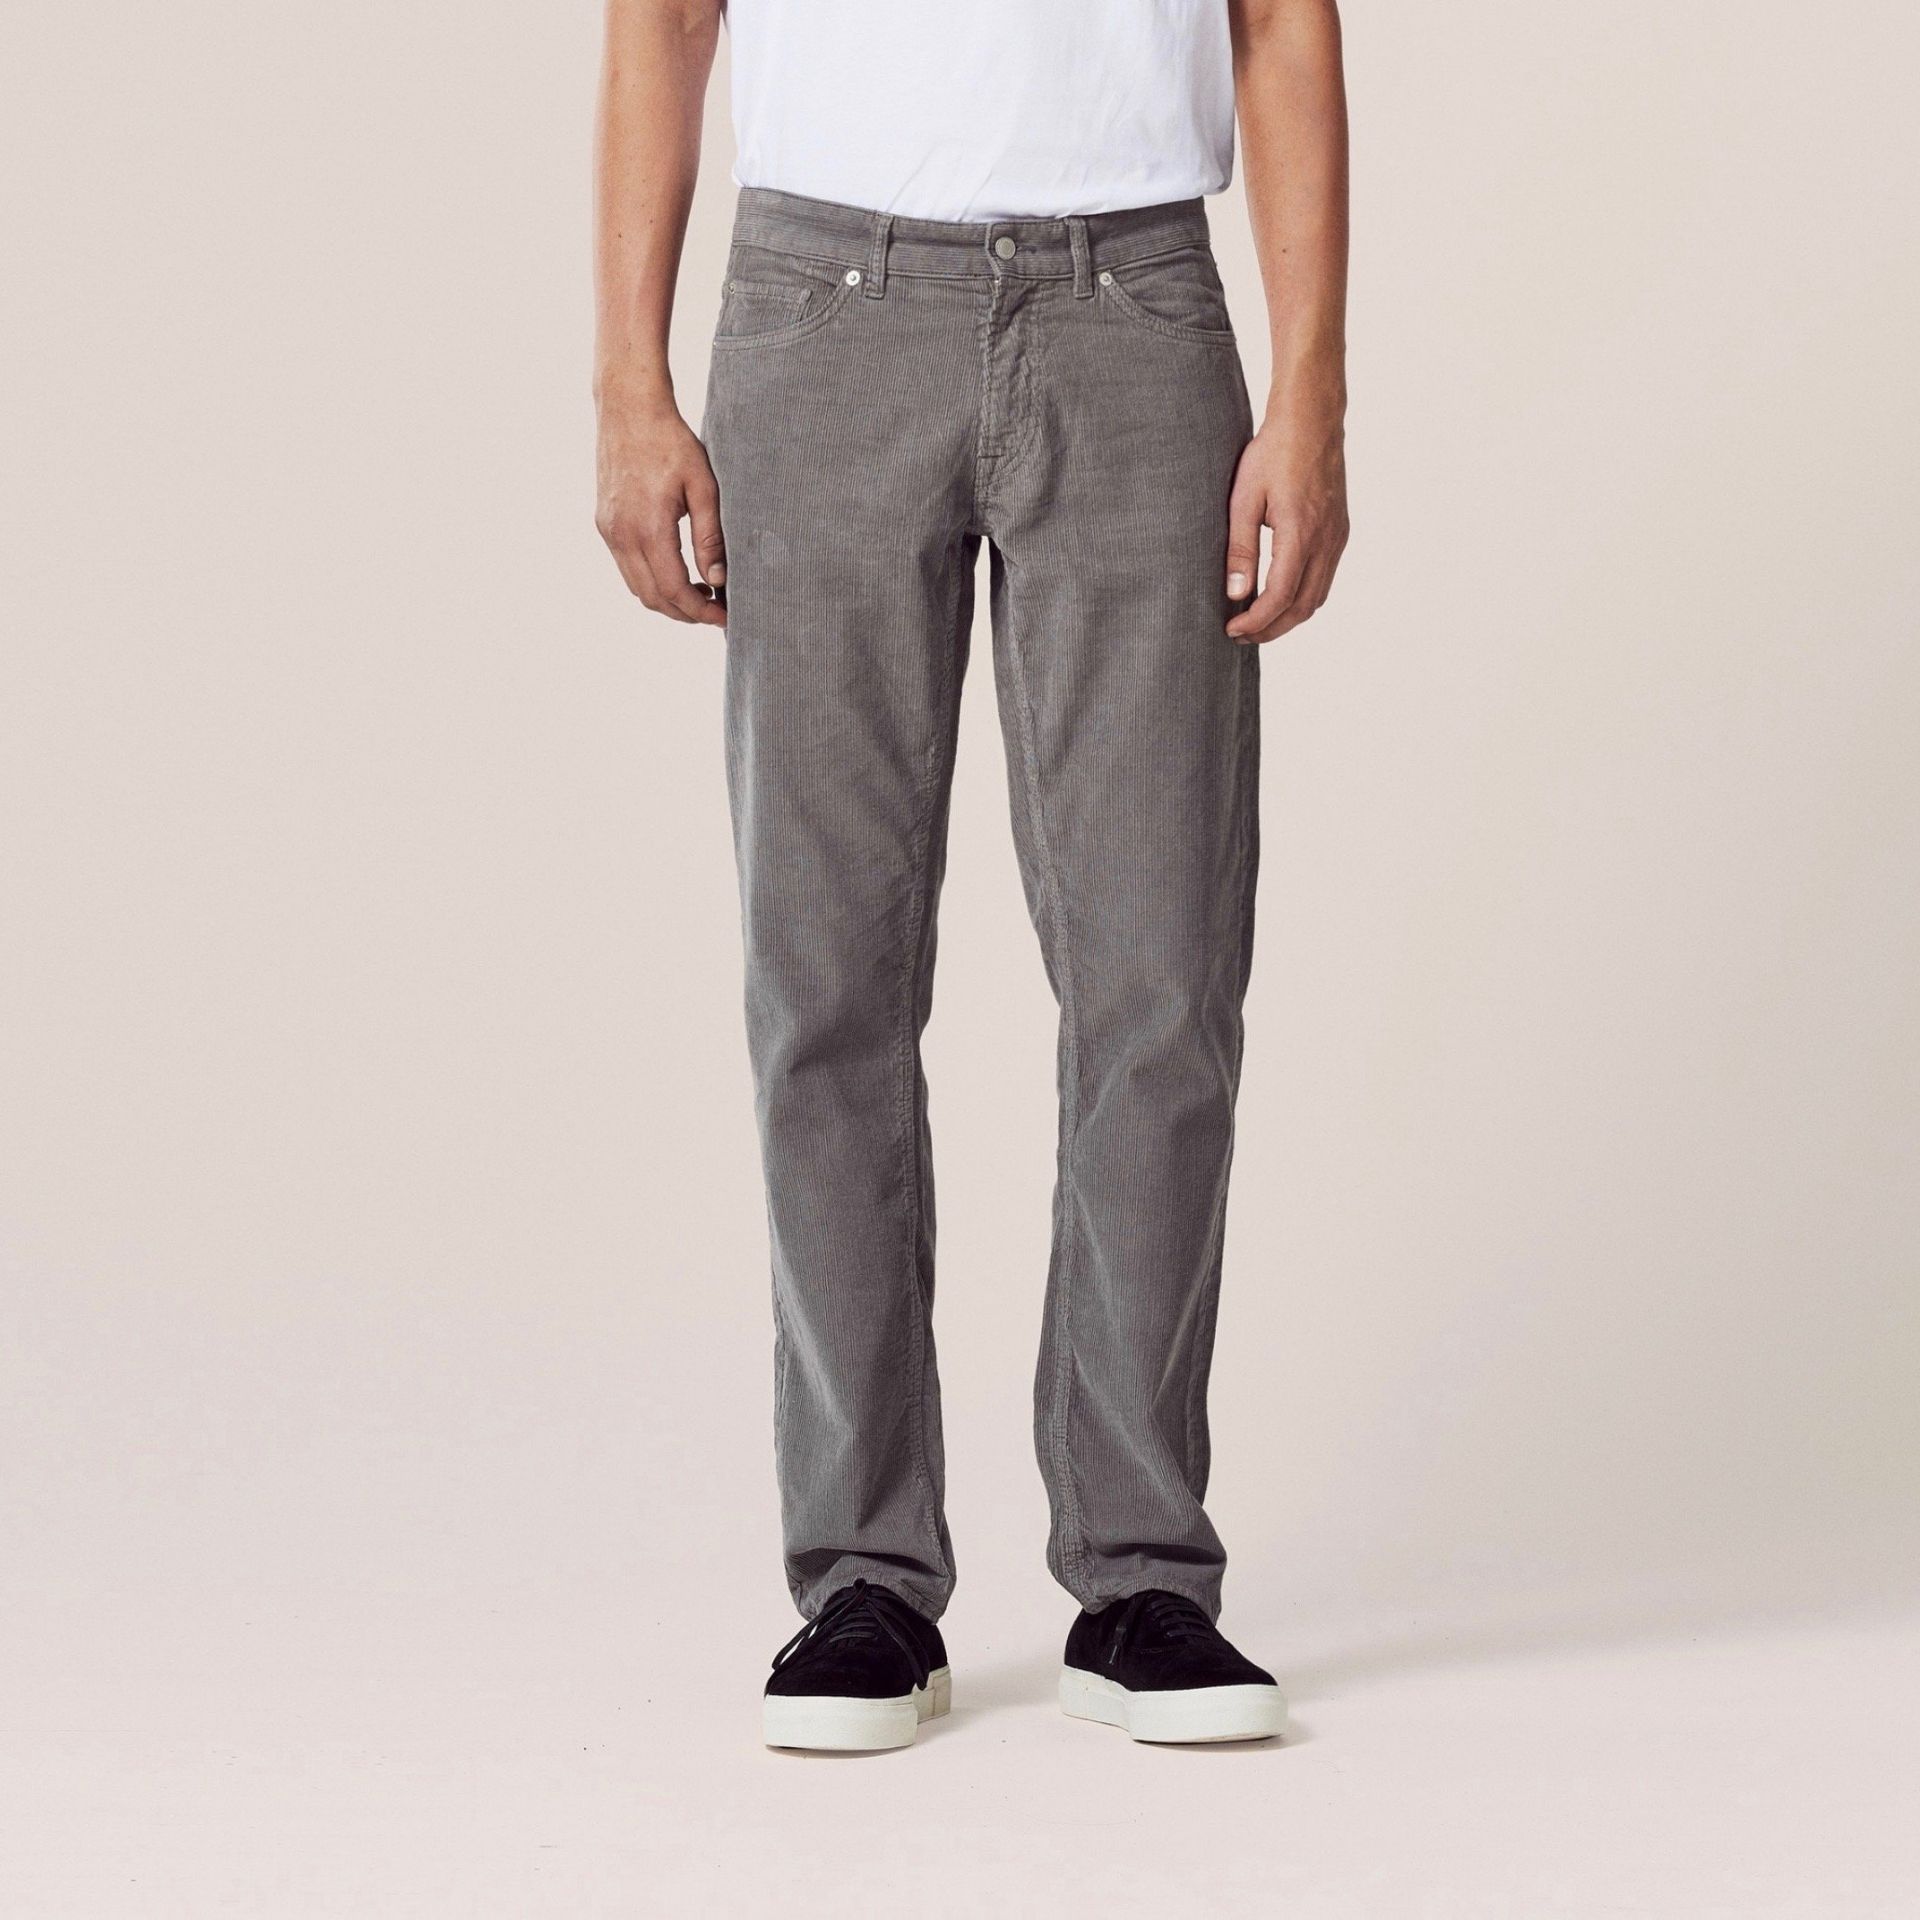 The Cords & Co. "Wes" Men's/High-Waist/ Straight Fit/ Narrow Bottom MSRP $160 - Image 2 of 6